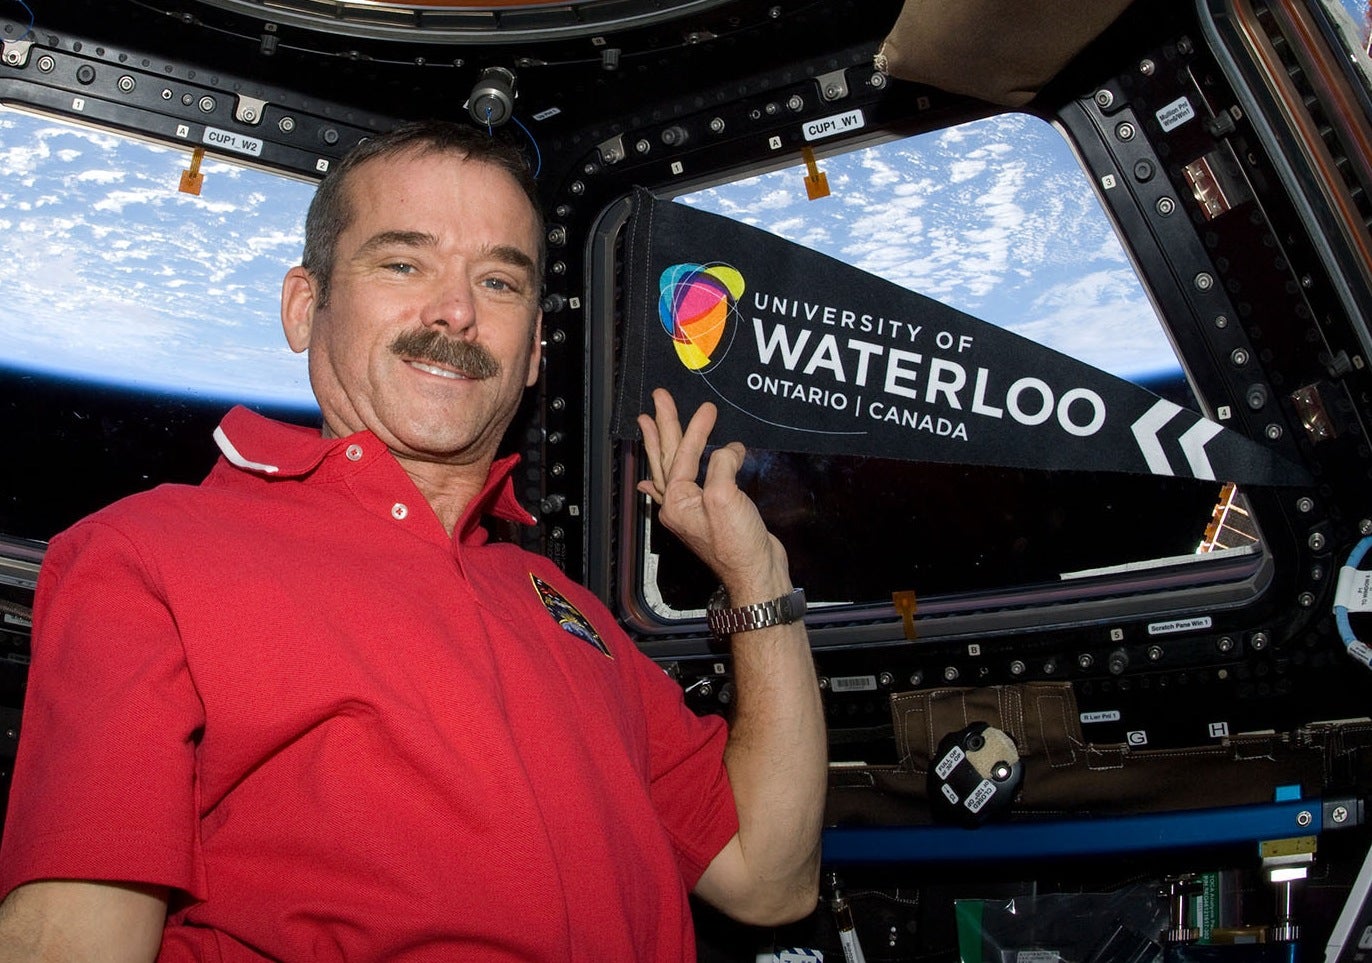 hadfield with waterloo sign